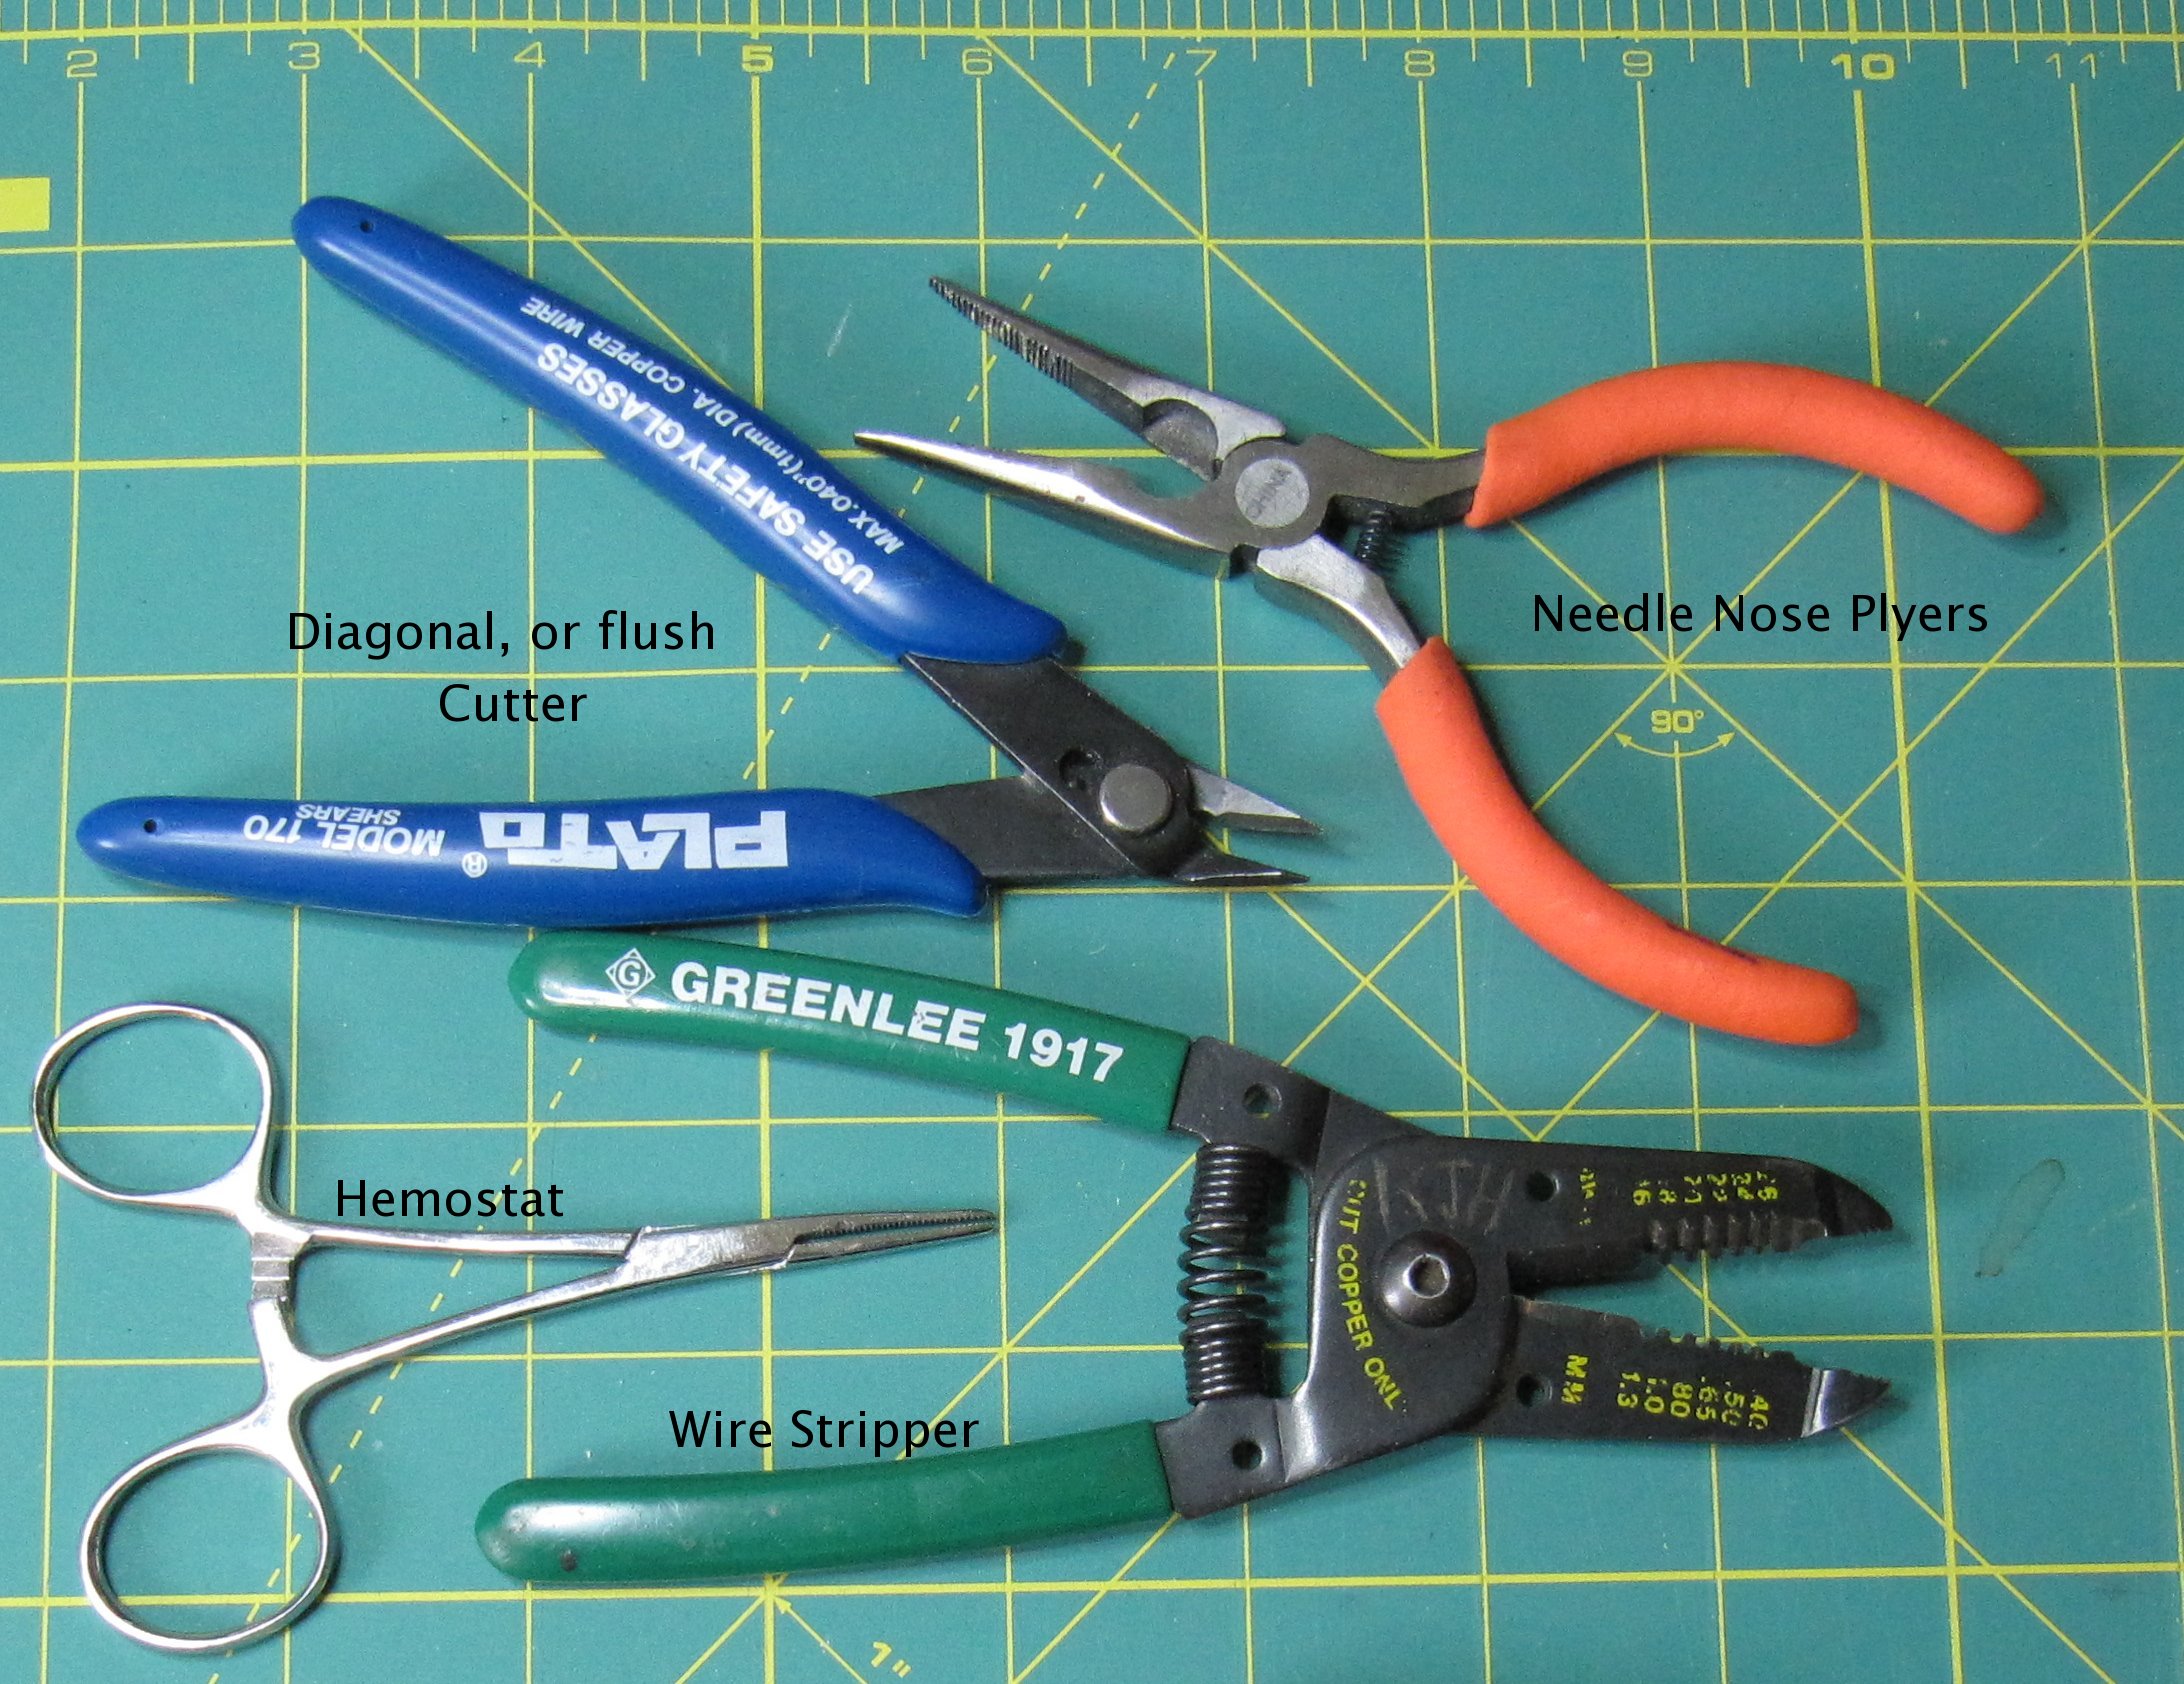 cutters, needle nose, strippers, hemostat